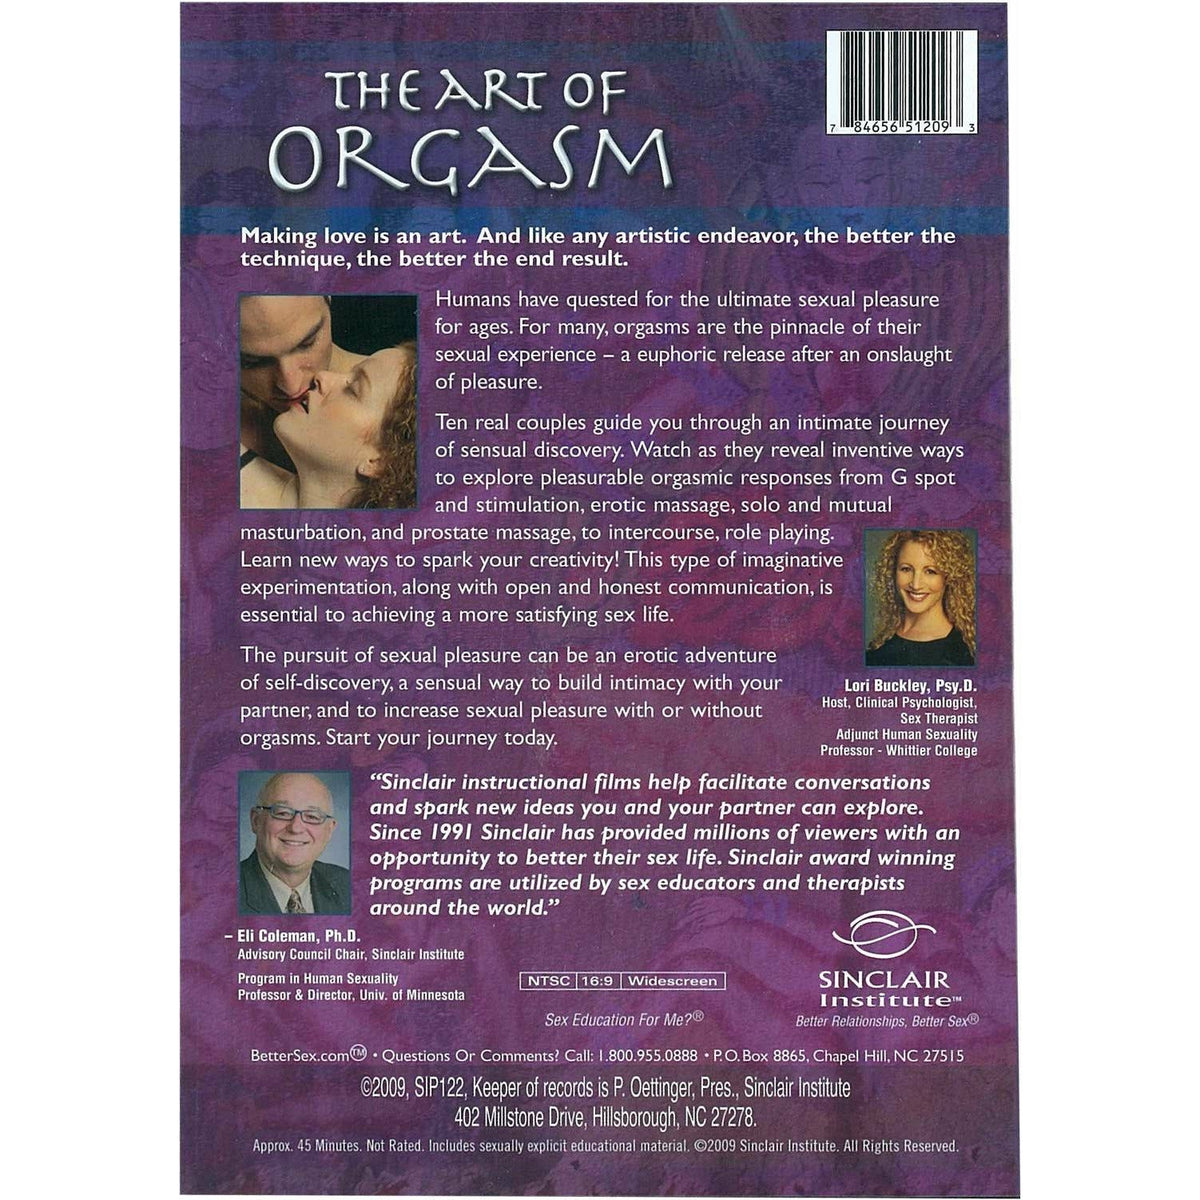 Sinclair Intimacy Institute The Art of the Orgasm DVD